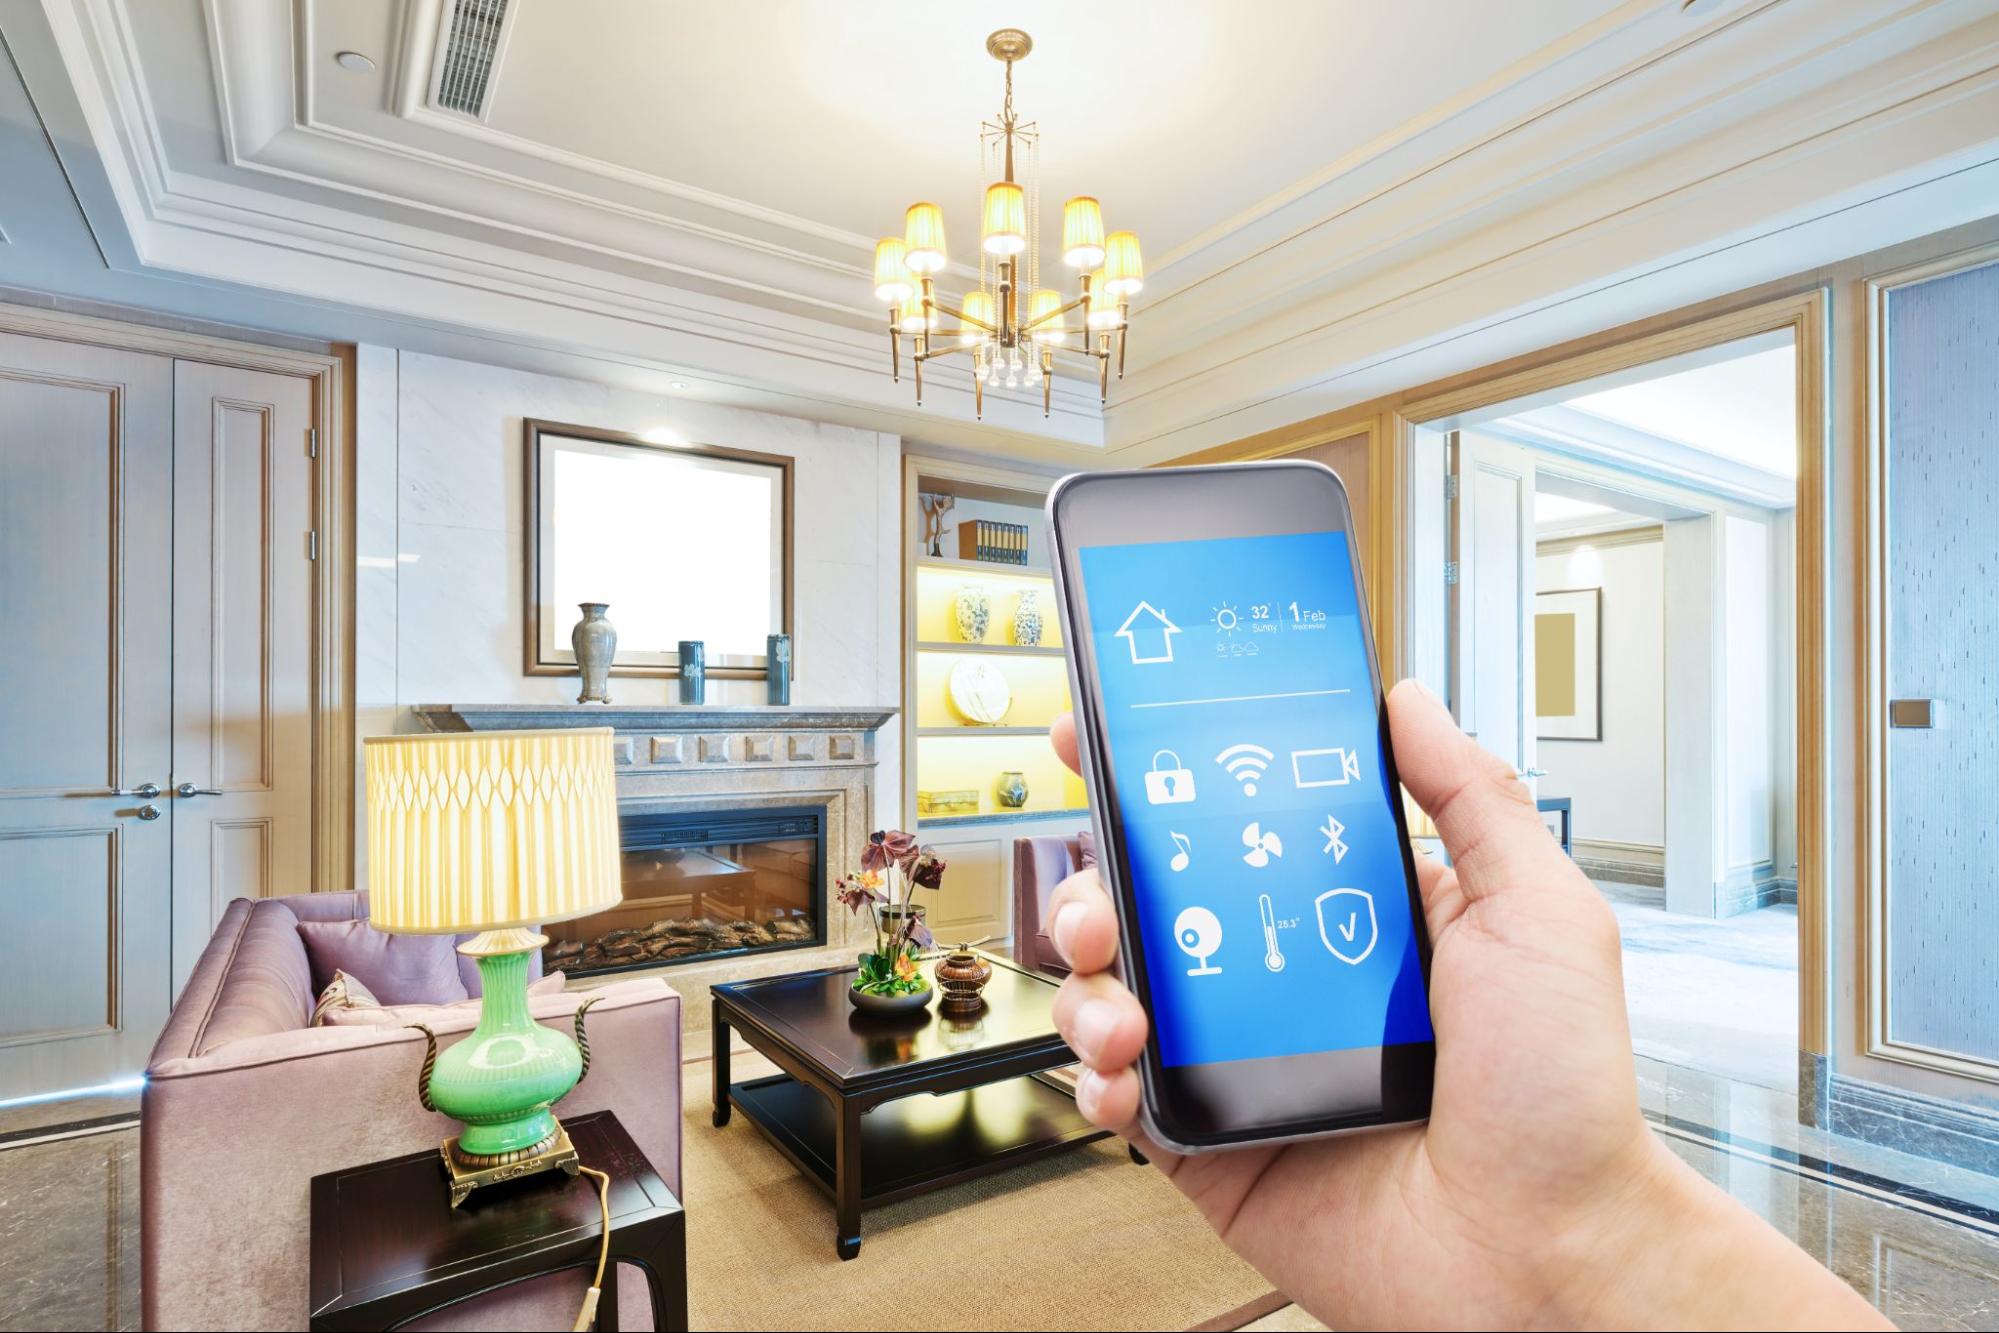 App on smartphone for a smart home, allows the user to control things like the thermostat from anywhere in the world